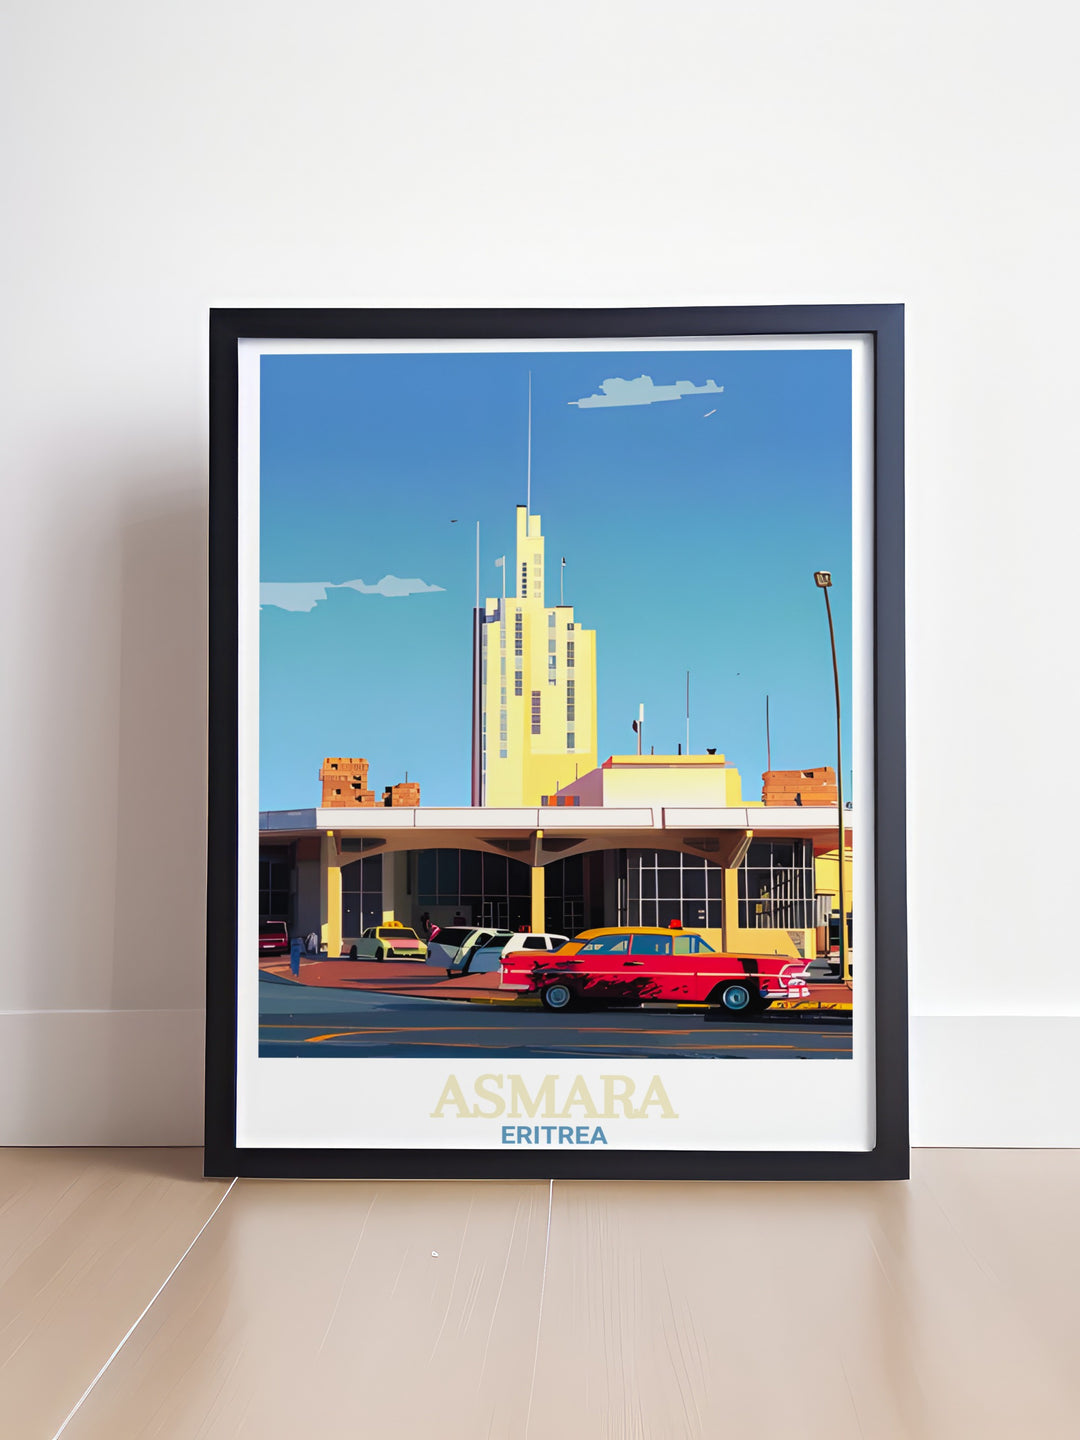 Elegant vintage print of Fiat Tagliero Building set against Asmara cityscape, perfect for adding a touch of history and style to any room.